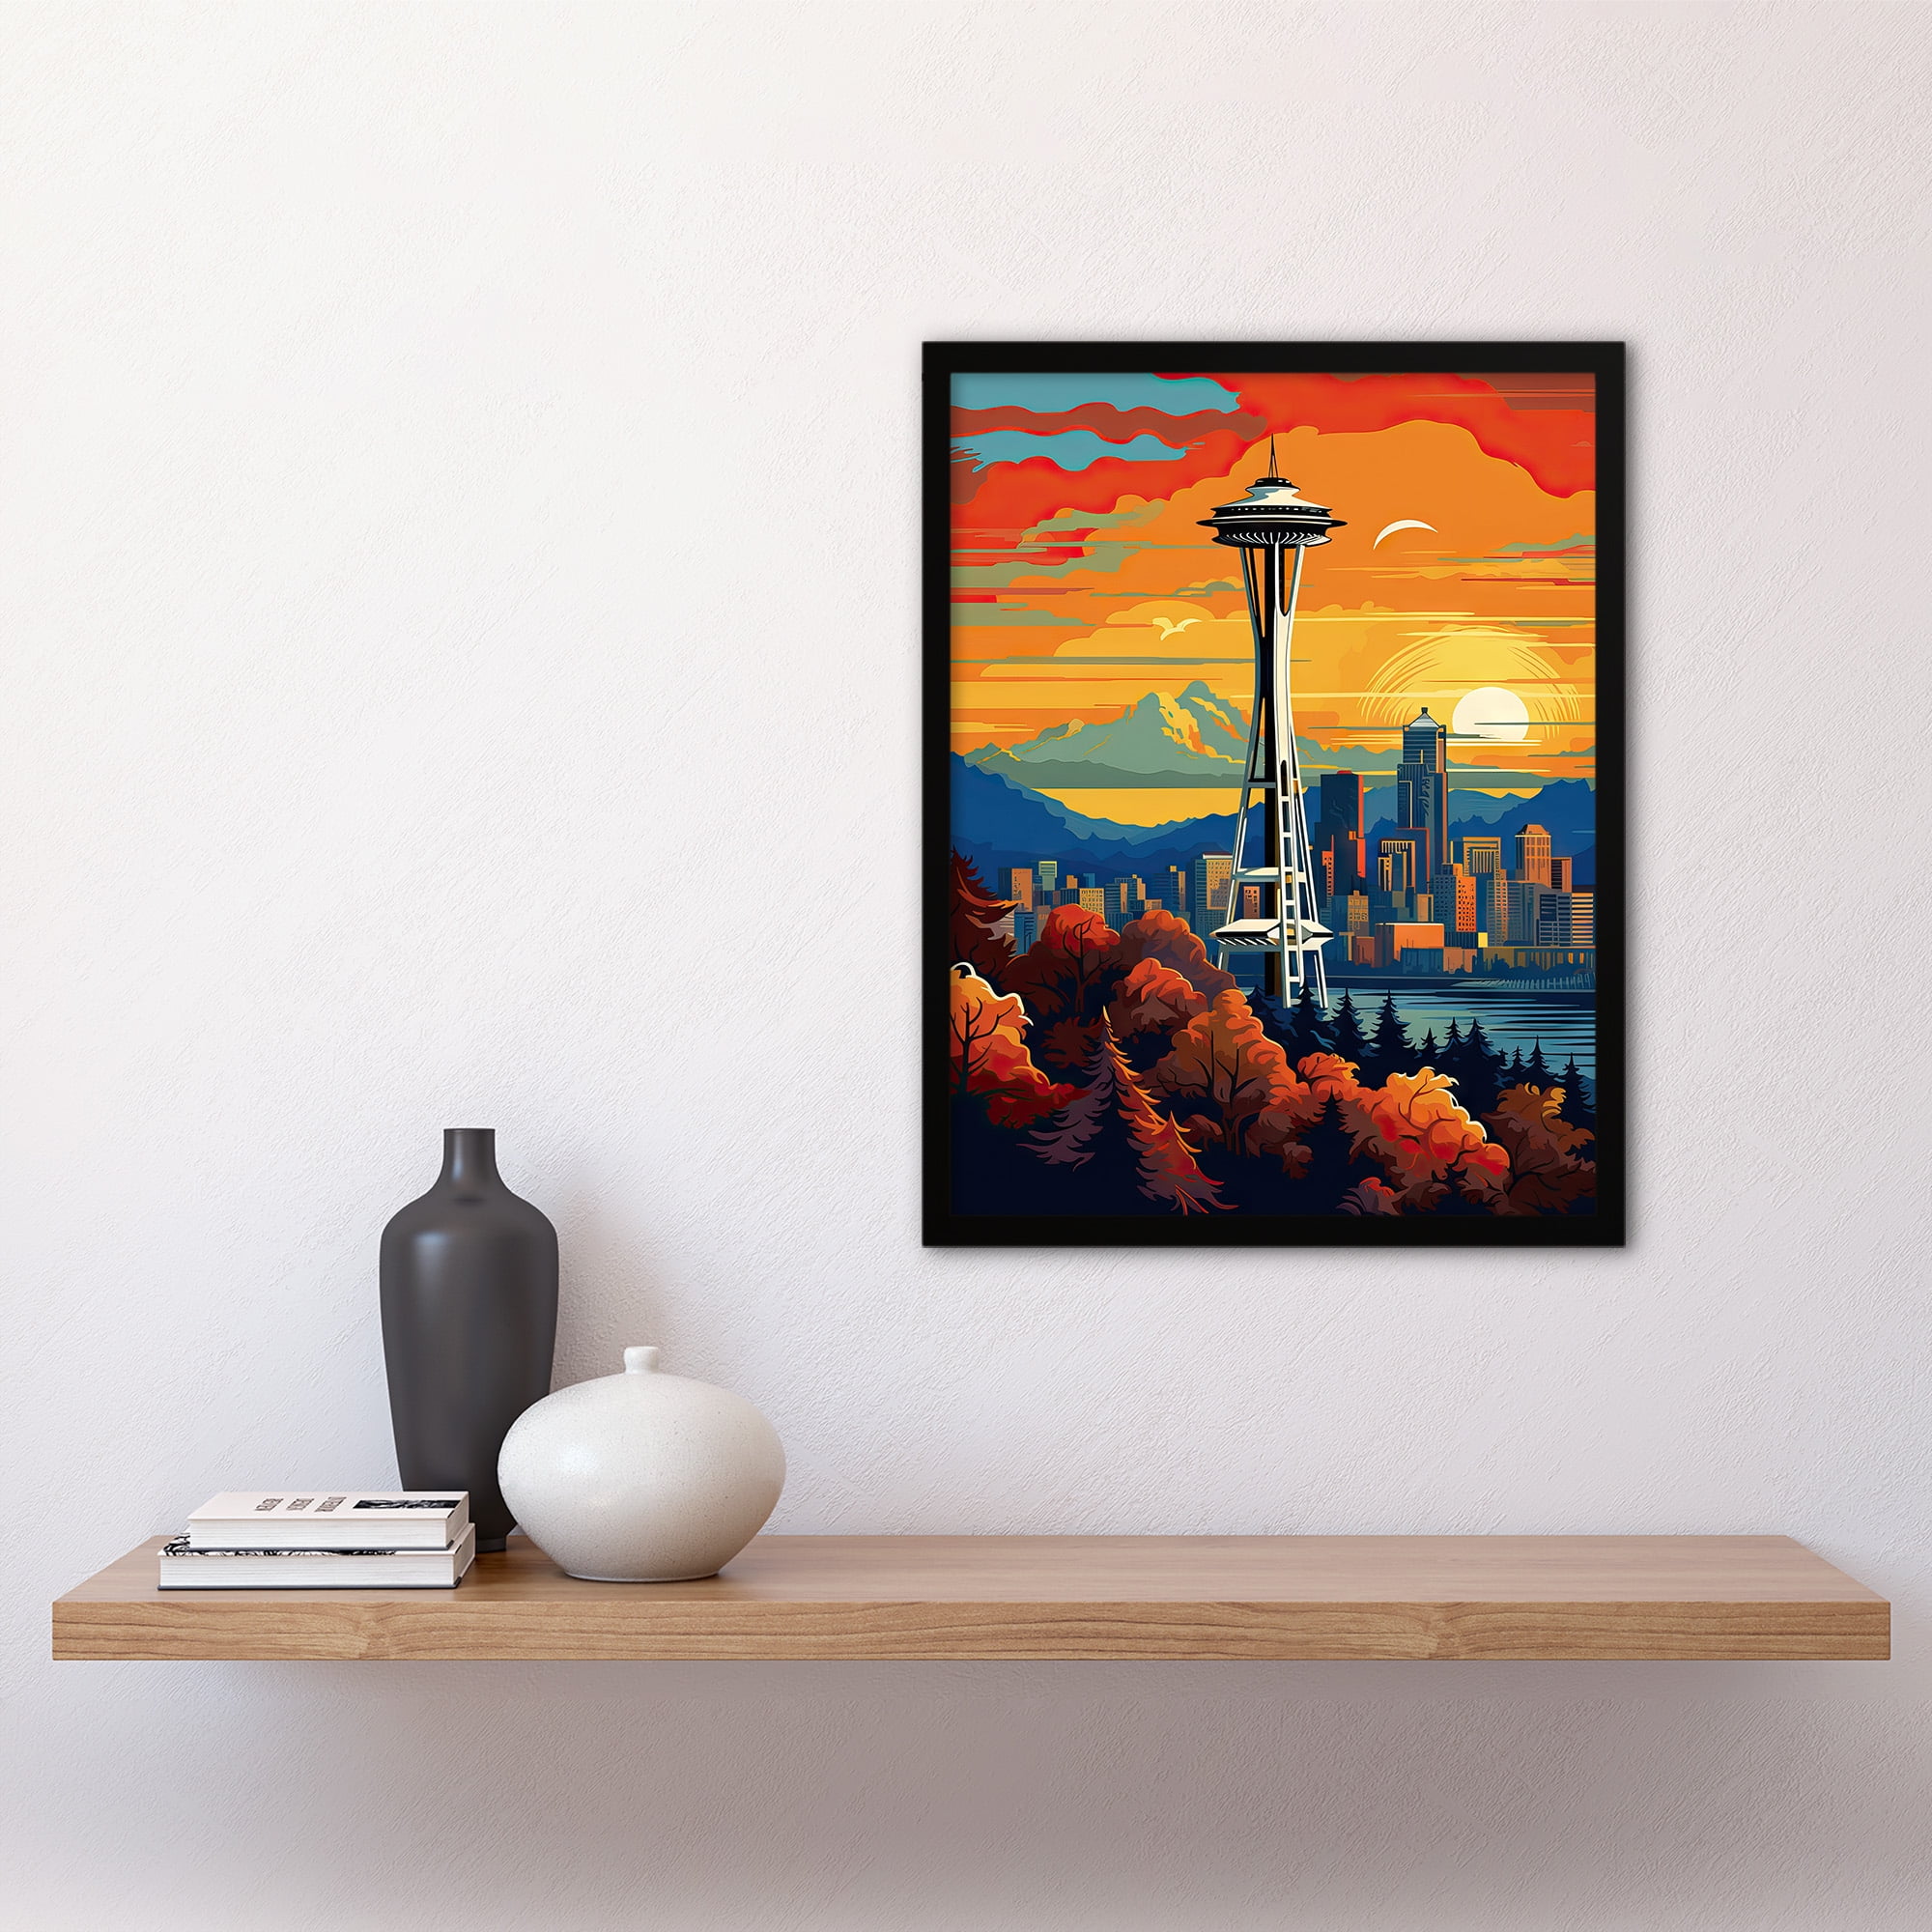 Paper Large Print Seattle Needle The Poster Wall Thick Washington Inch Modern Space Funky 18X24 Painting Art